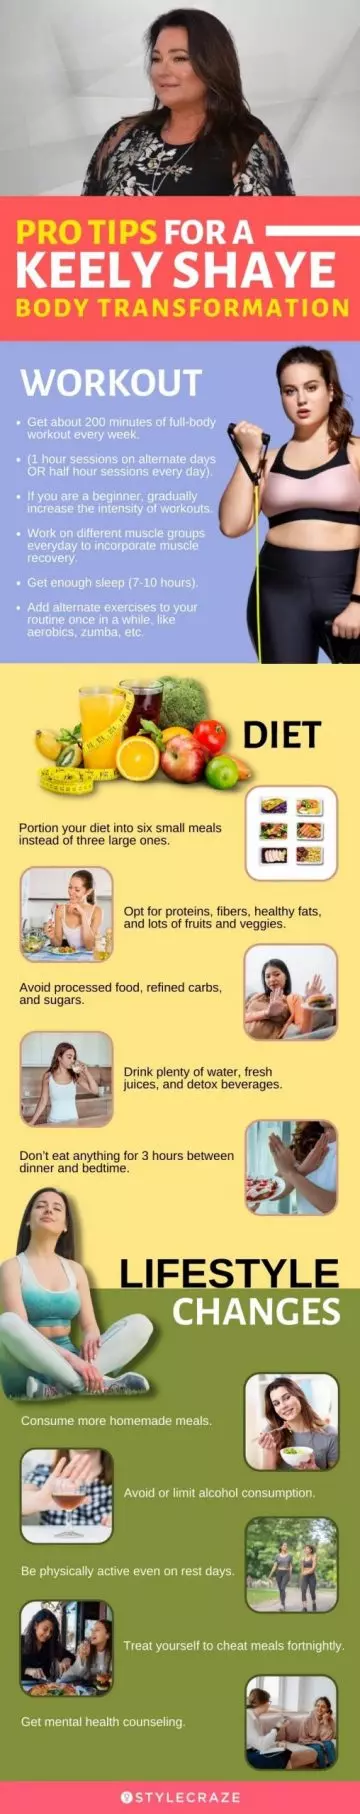 pro tips for a keely shaye body transformation (infographic)